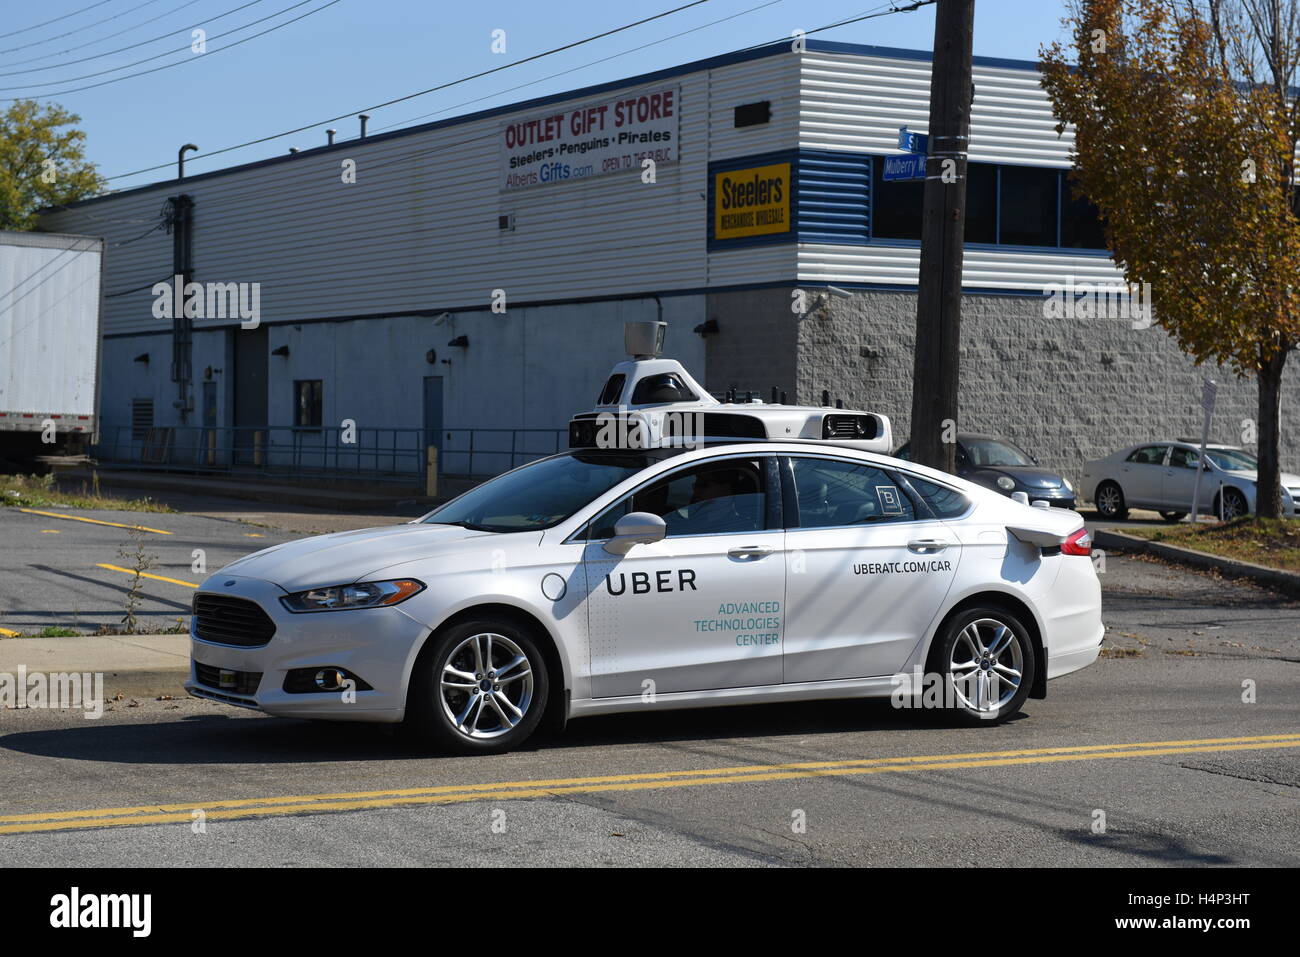 A Driverless Self Driving car being tested by Uber the taxi service company in Pittsburgh, PA Stock Photo